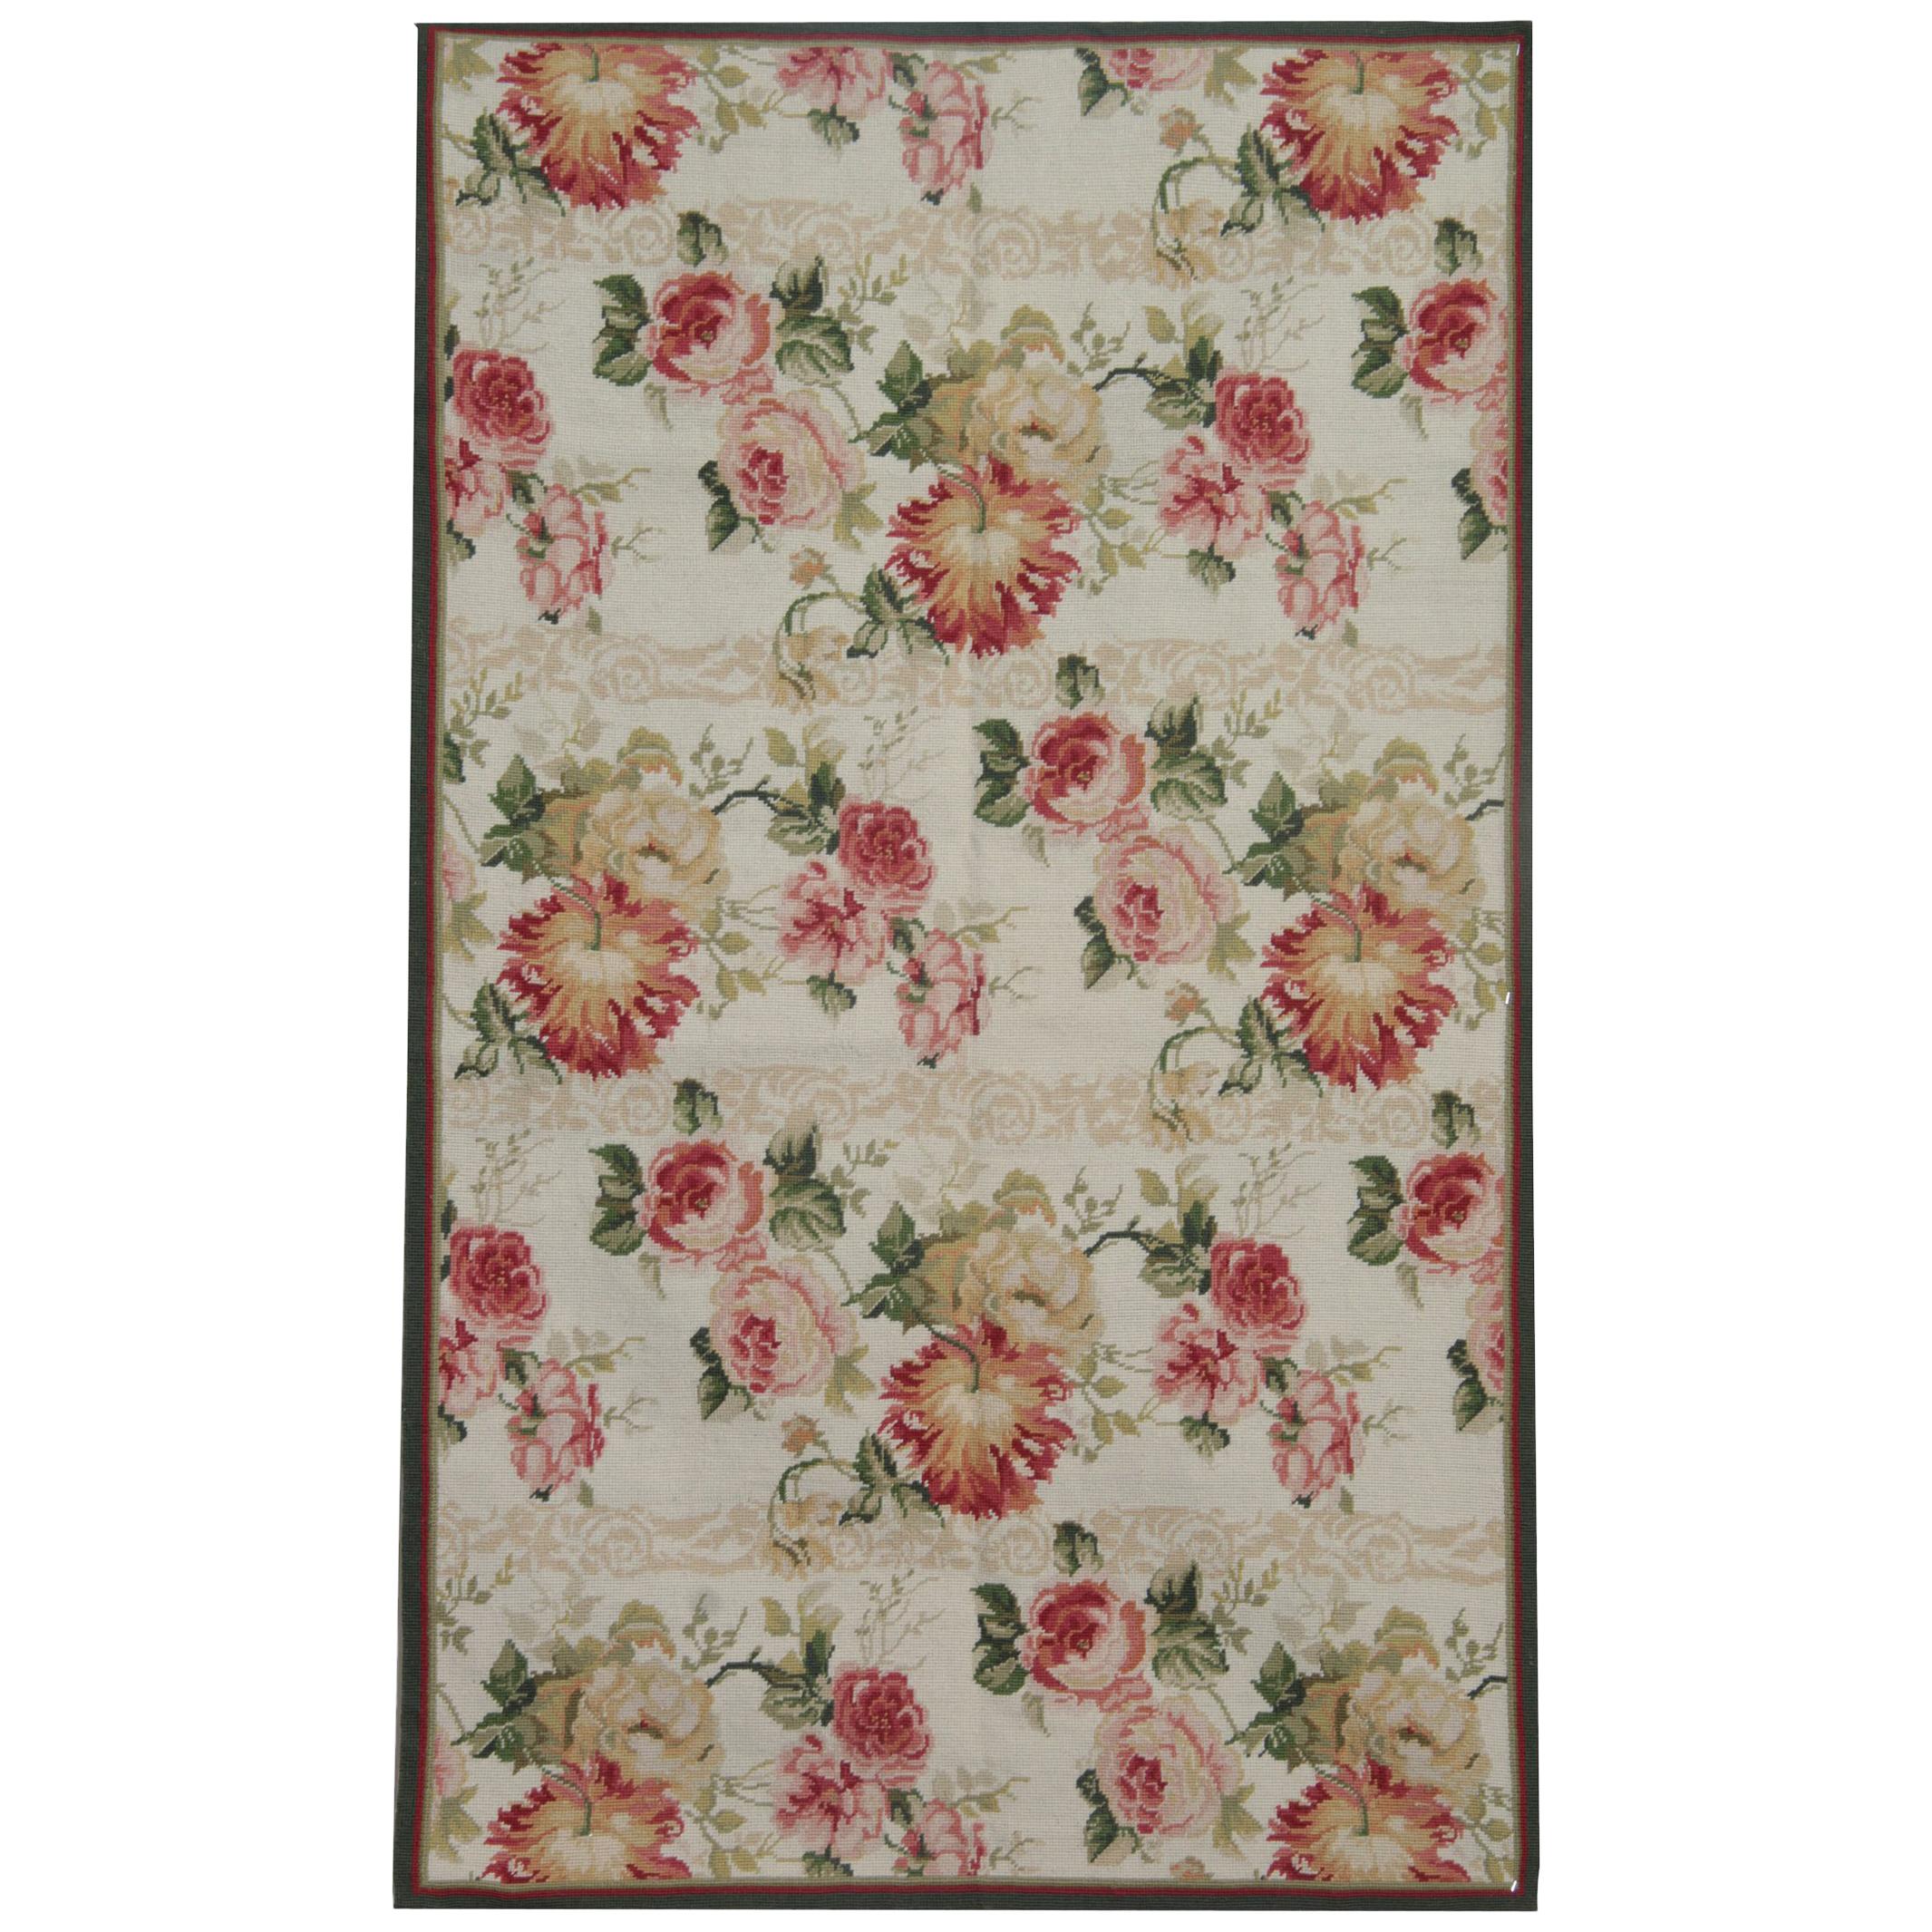 Handmade Rug, Floral Patterned Rug, Aubusson Style Rugs, Needlepoint